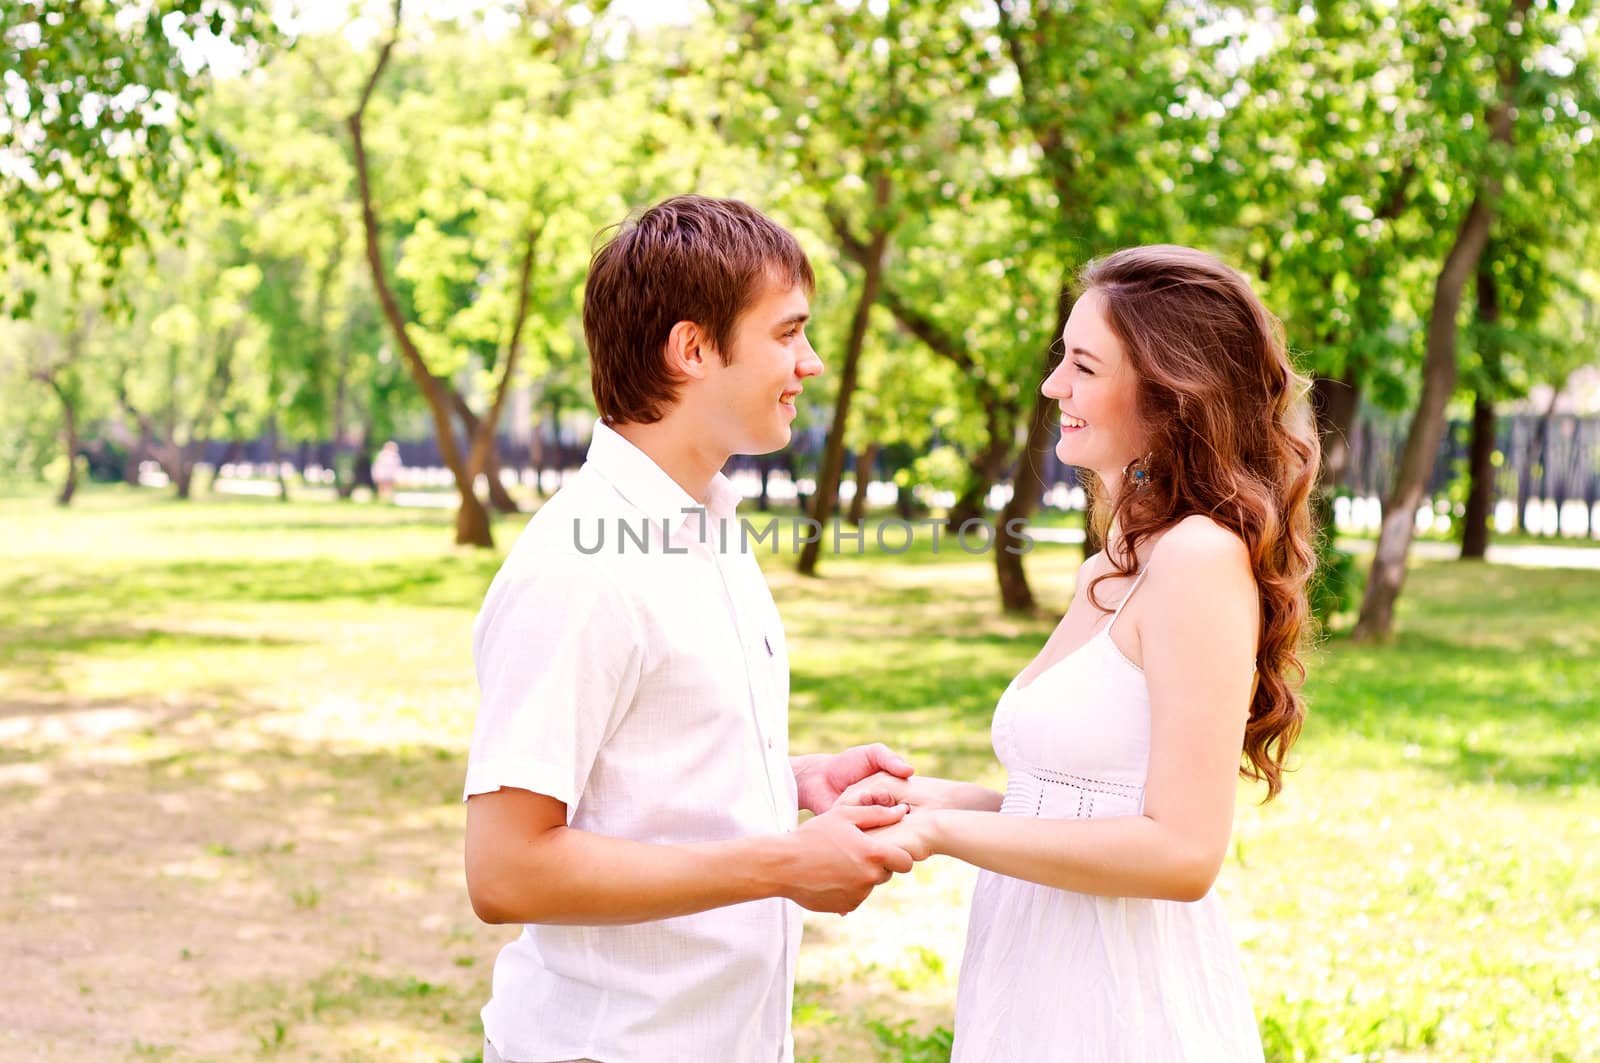 couple holding hands in the park, spending time with loved ones